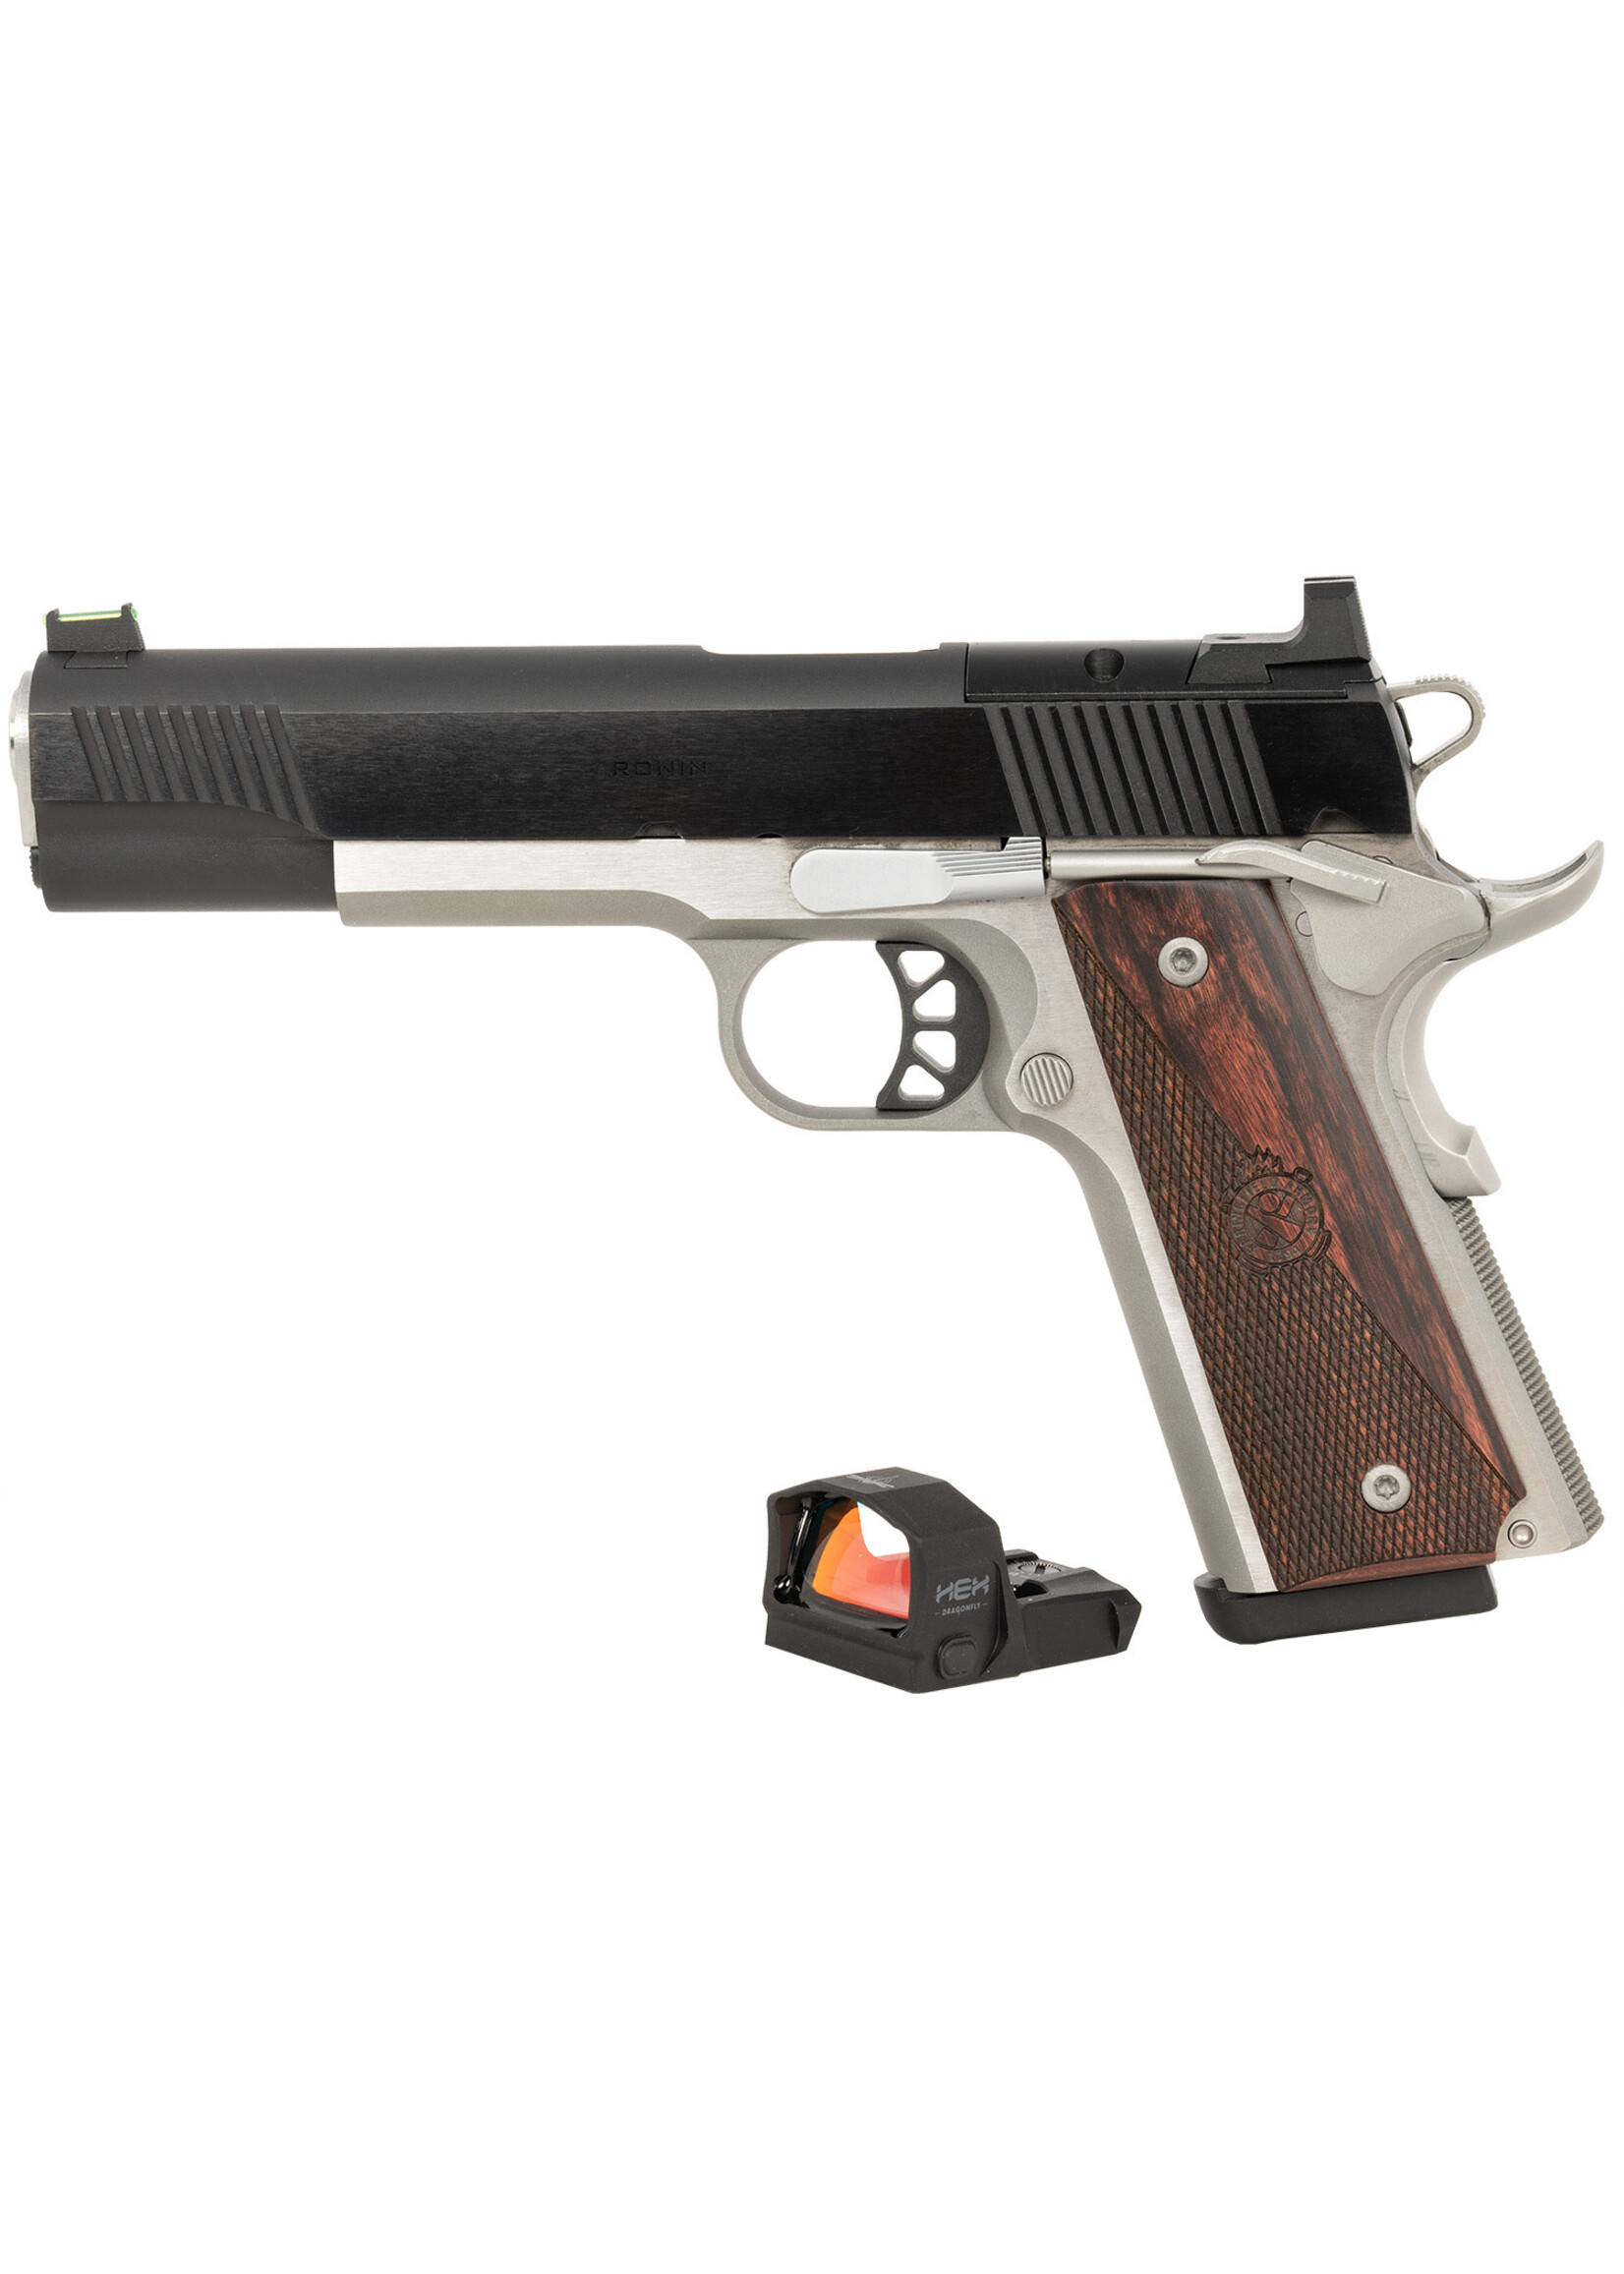 Springfield Armory Springfield Armory PX9121LAOSD 1911 Ronin 10mm Auto 8+1 5" Stainless Match Grade Barrel, Blued Serrated Carbon Steel Slide, Stainless Steel Frame w/Beavertail, Crossed Cannon Wood Grip, Hex Dragonfly Red Dot